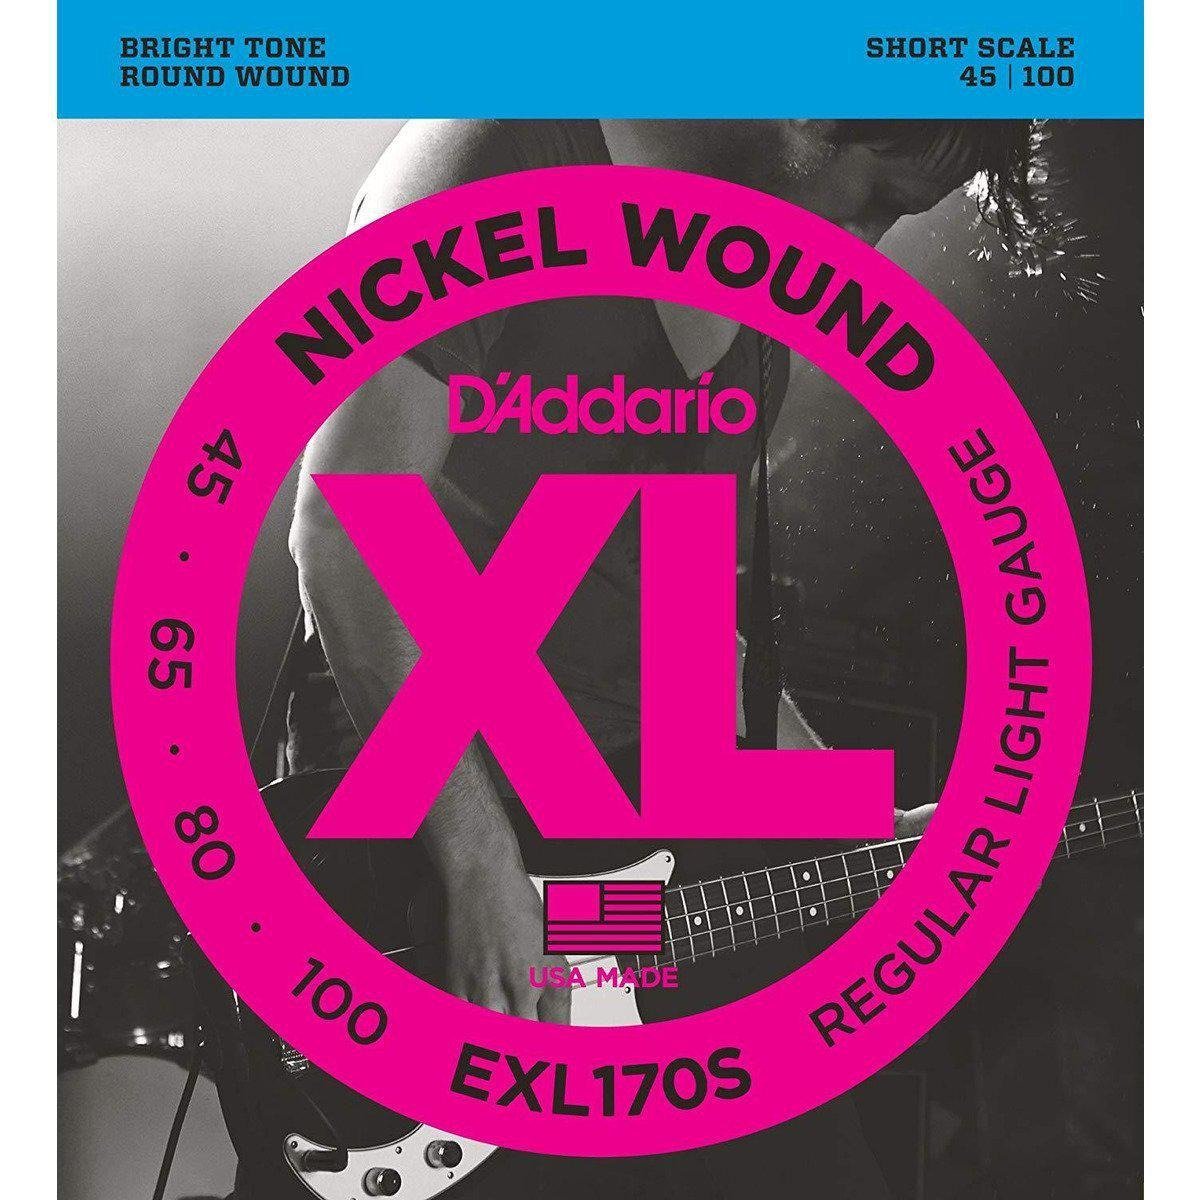 D'Addario EXL170S Nickel Wound Bass, Light, 45-100, Short Scale-Andy's Music